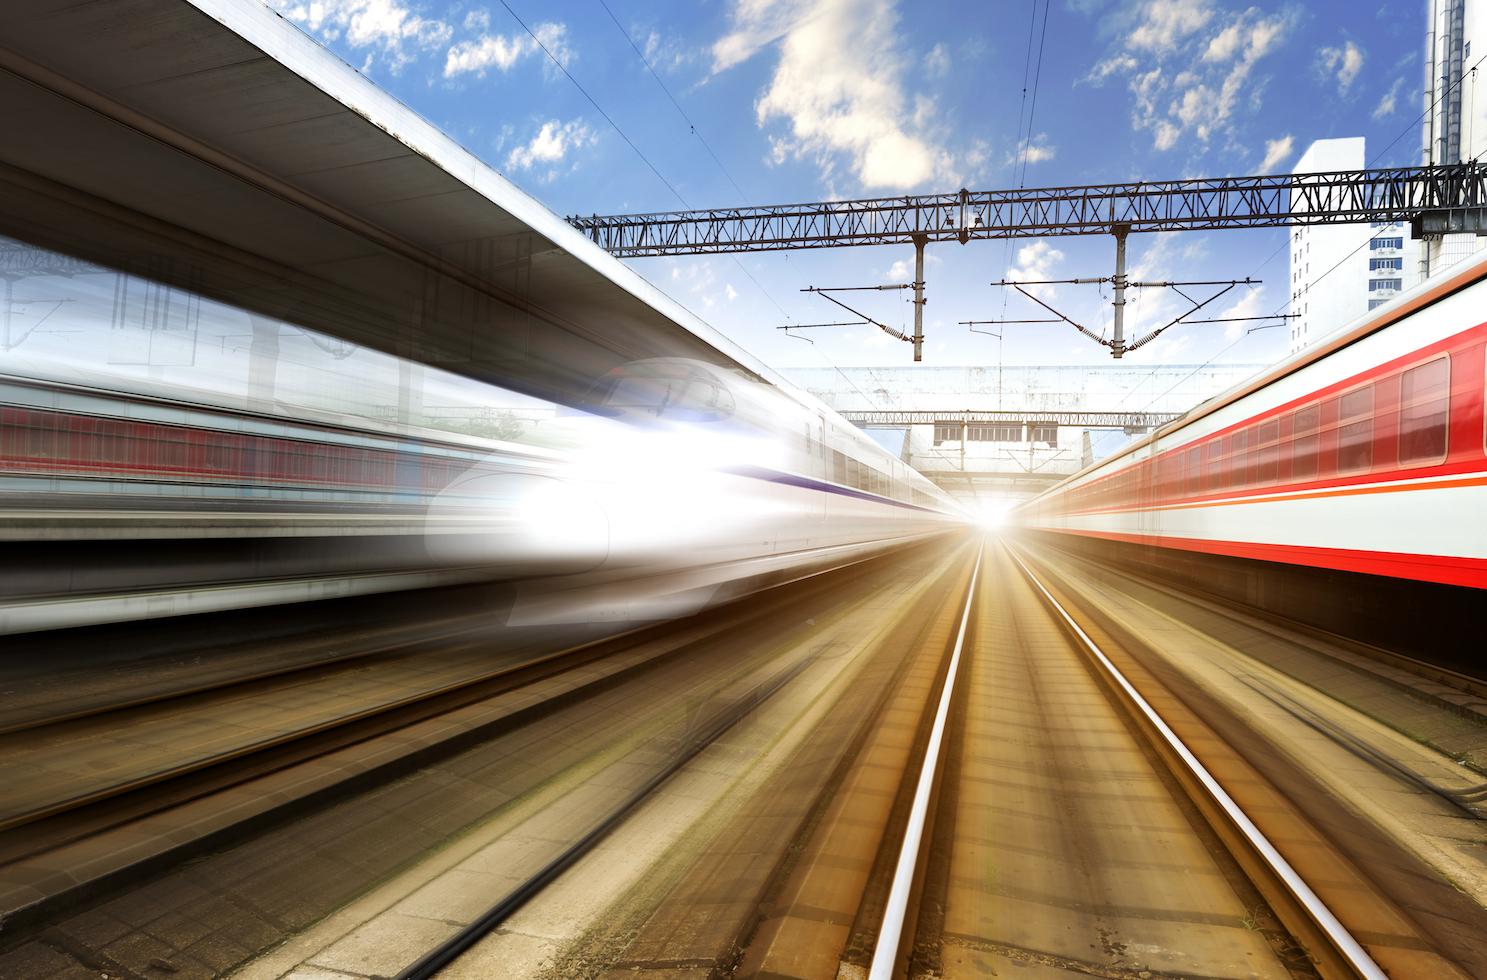 Blurred image of two high-speed trains